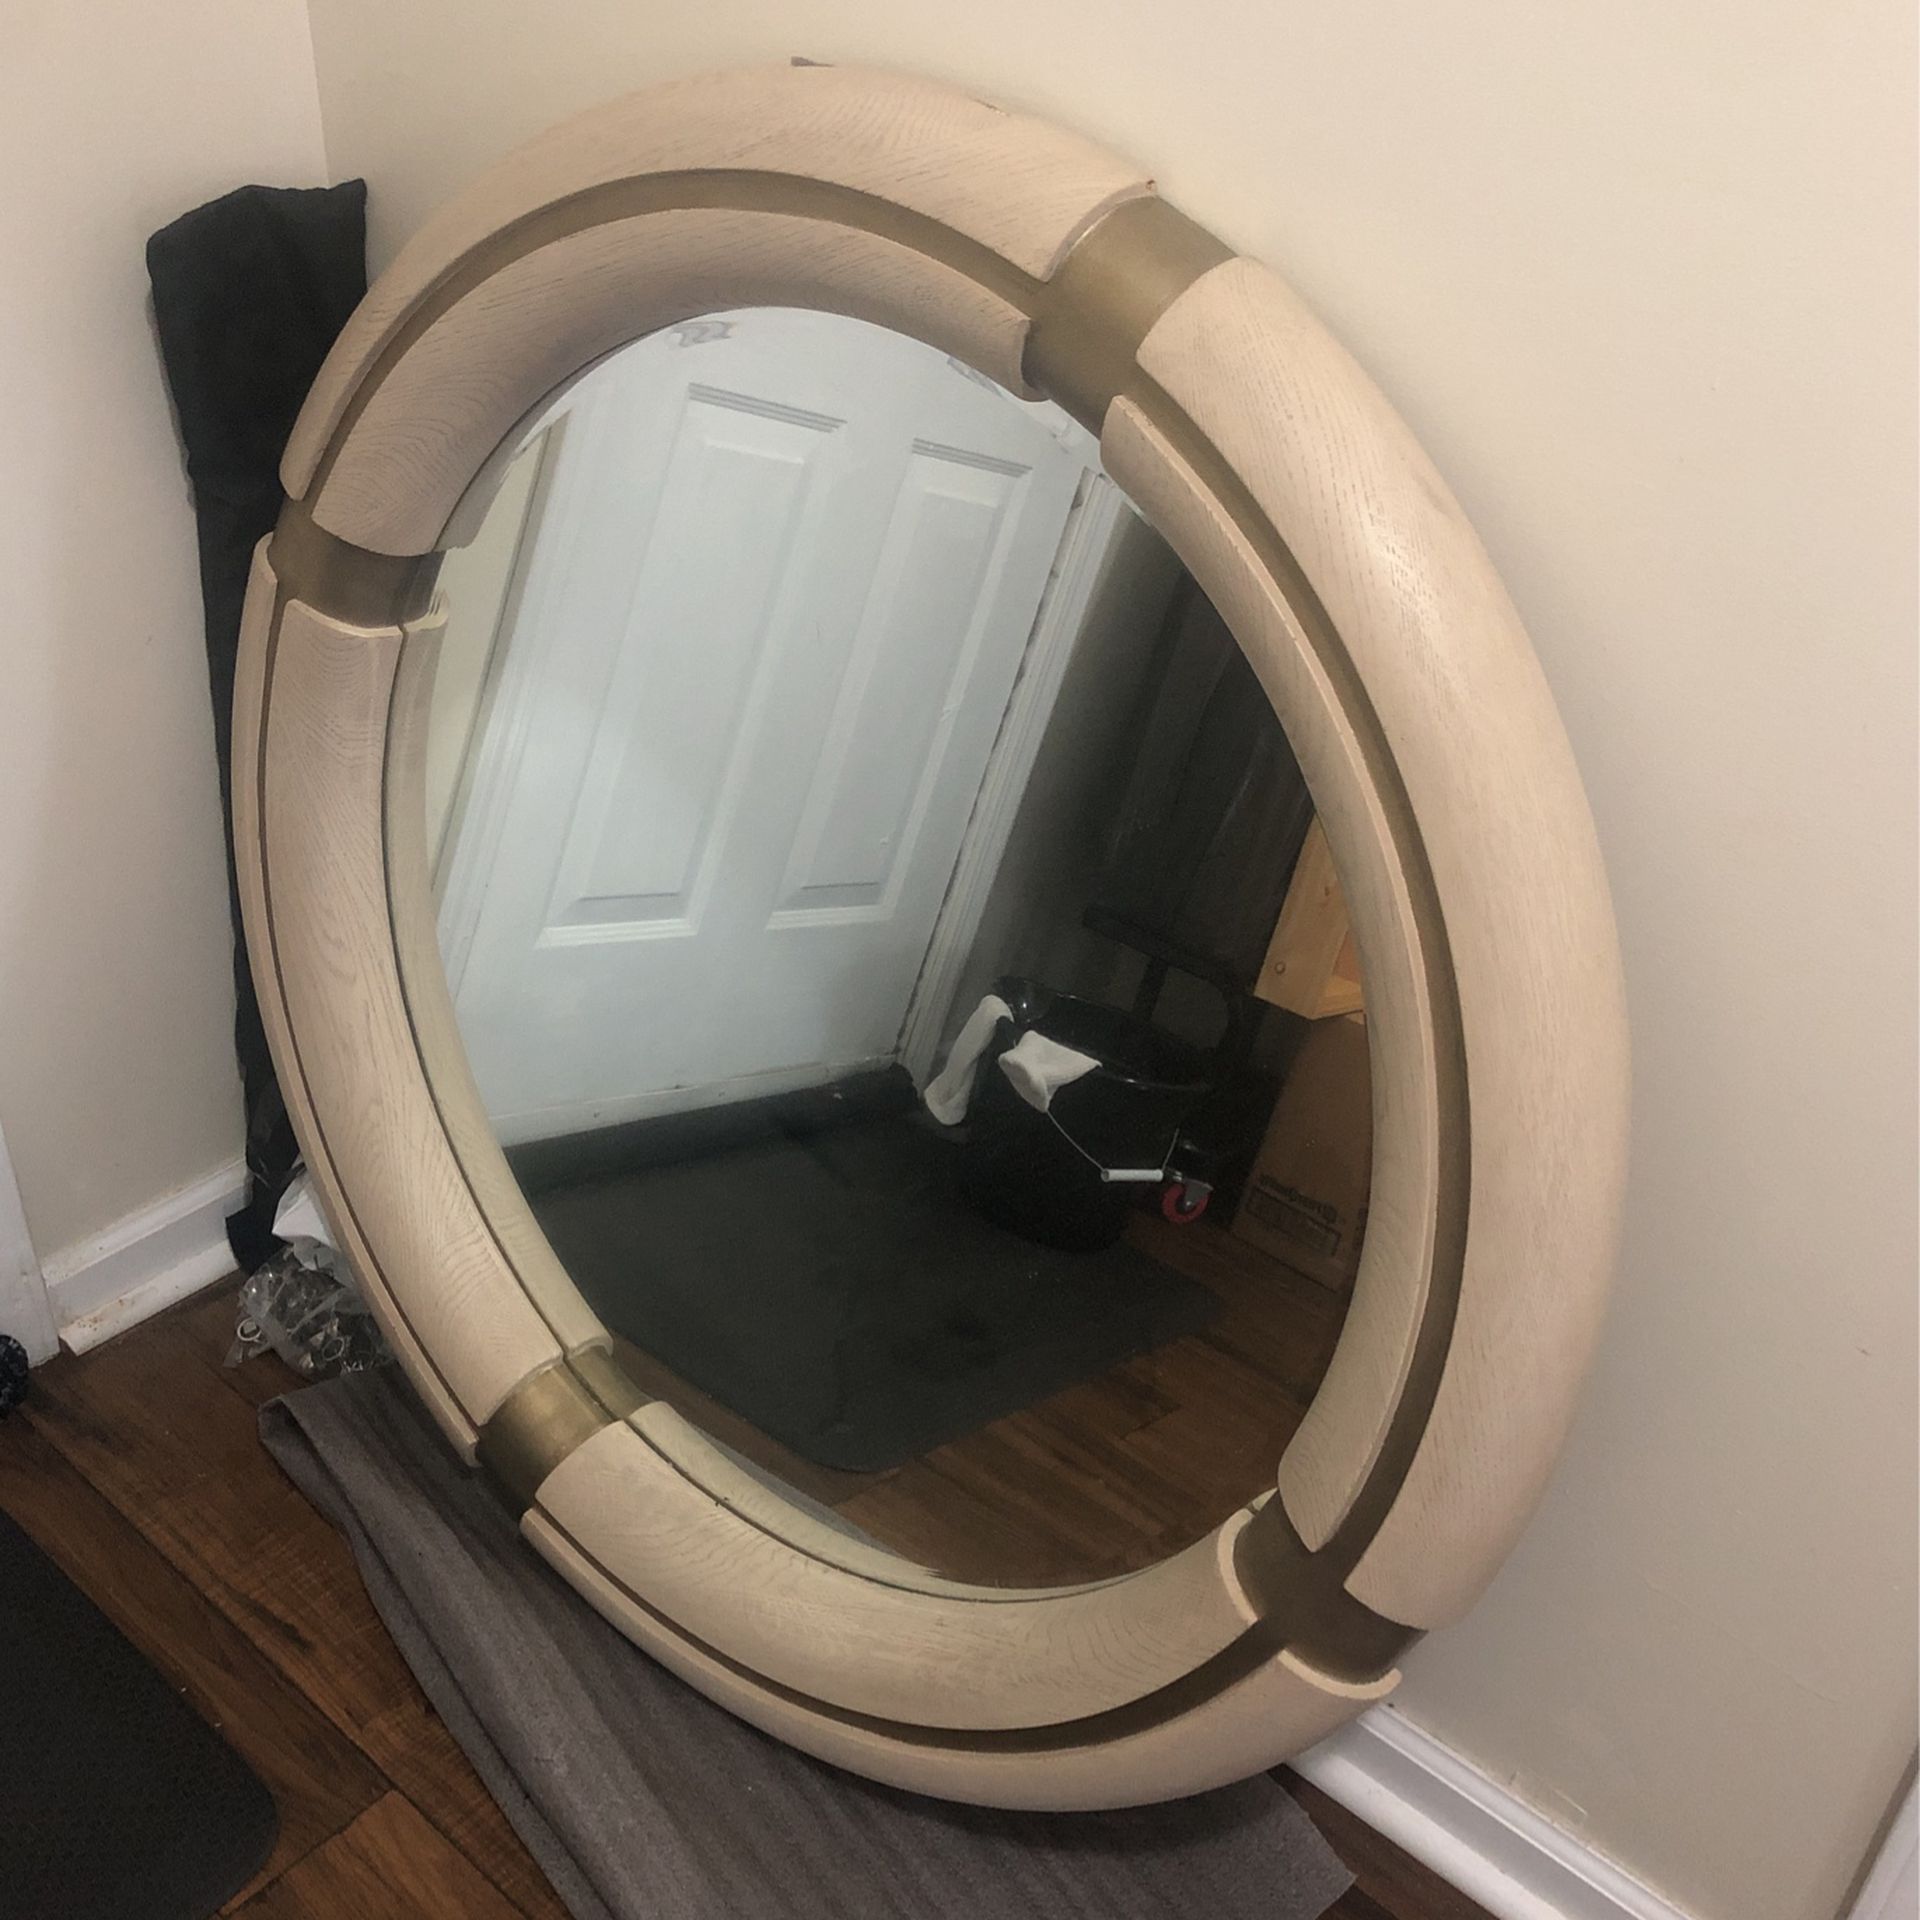 Big Mirror 41 By 41 In Good Condition Pick Up Only 